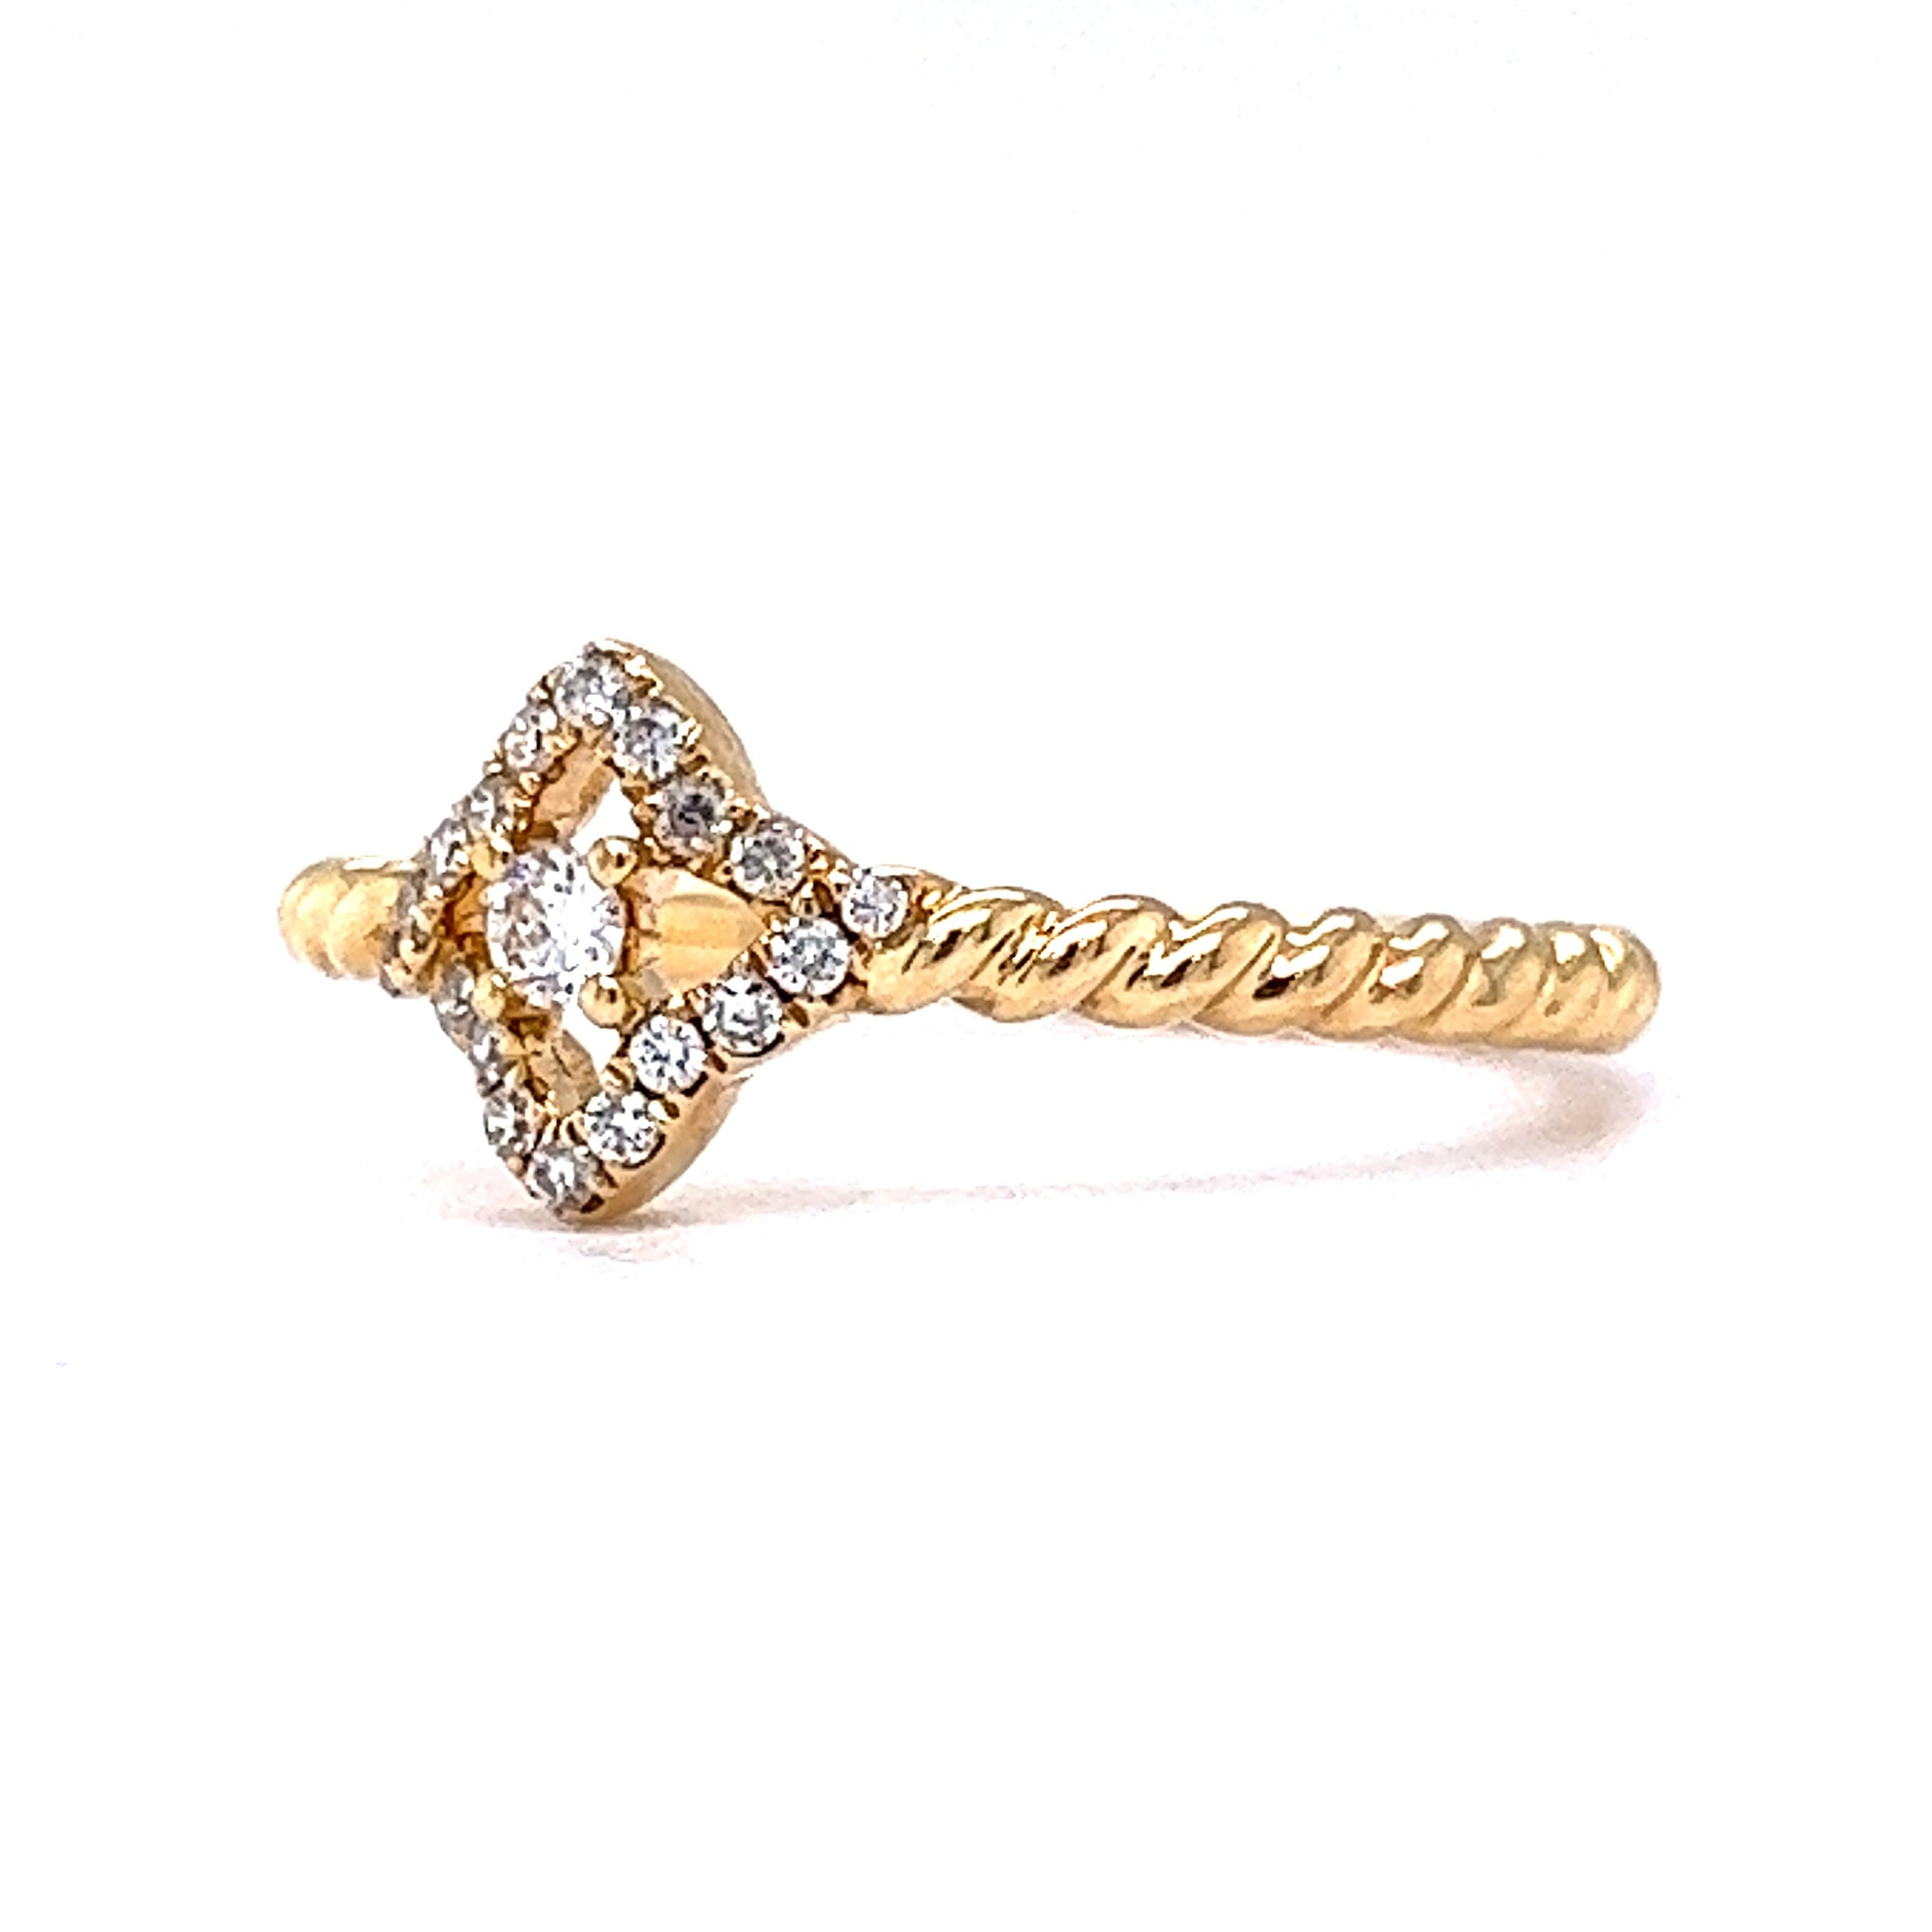 Twisted Band Pave Diamond Stacking Ring in 18k Yellow GoldComposition: 18 Karat Yellow GoldRing Size: 7Total Diamond Weight: .15 ctTotal Gram Weight: 2.6 gInscription: 18k 750 D0.153